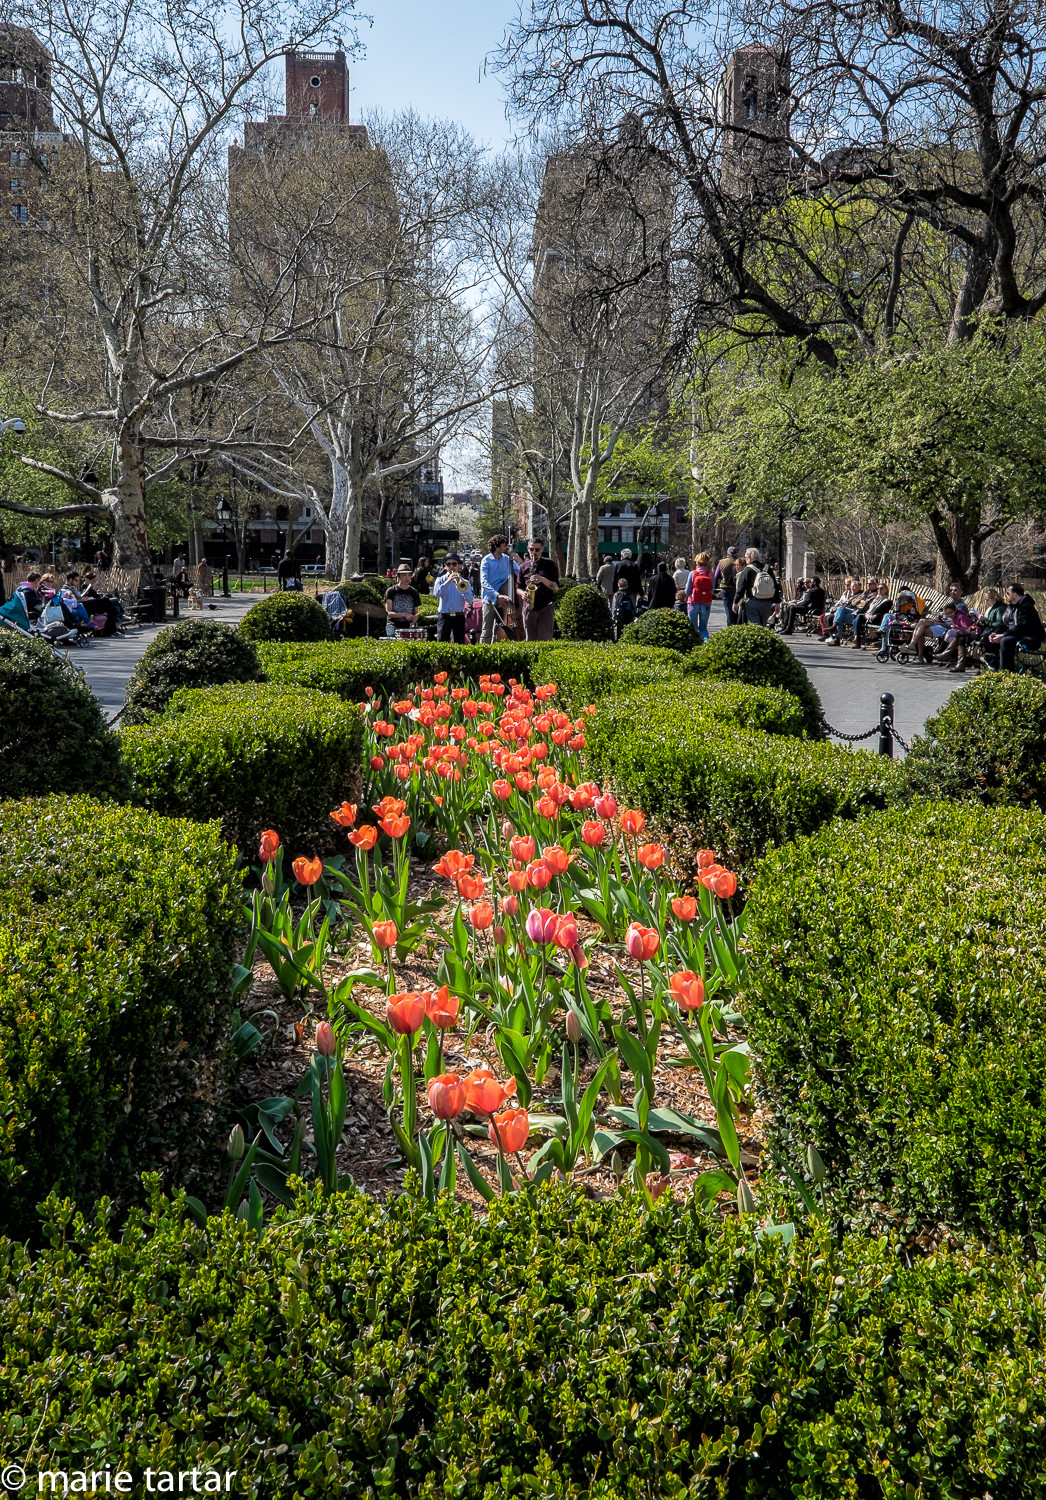 Washington Square Park decked out in spring color, with beds of tulips.